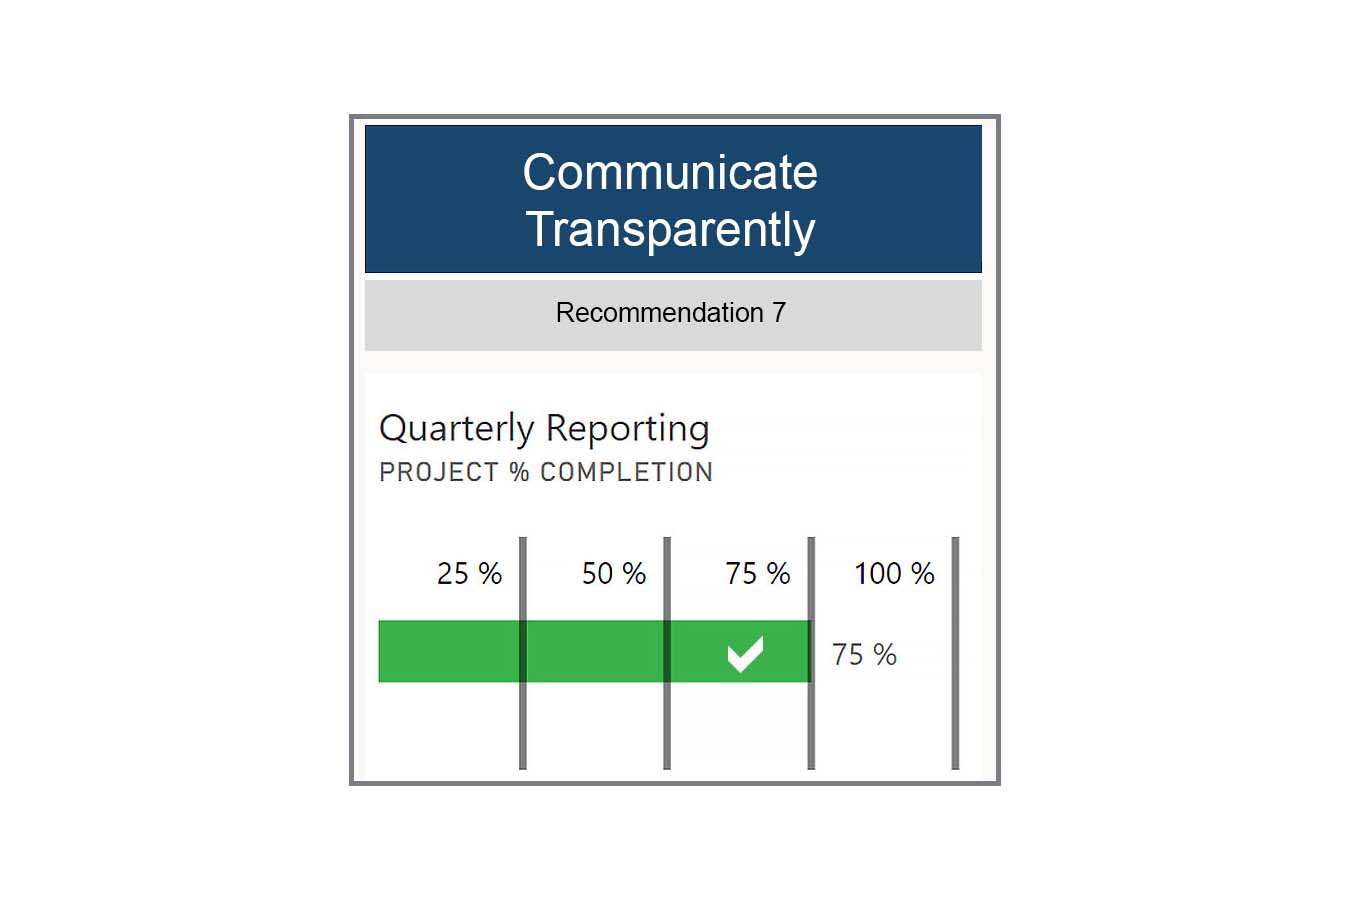 Communicate transparently recommendation 7 graphic